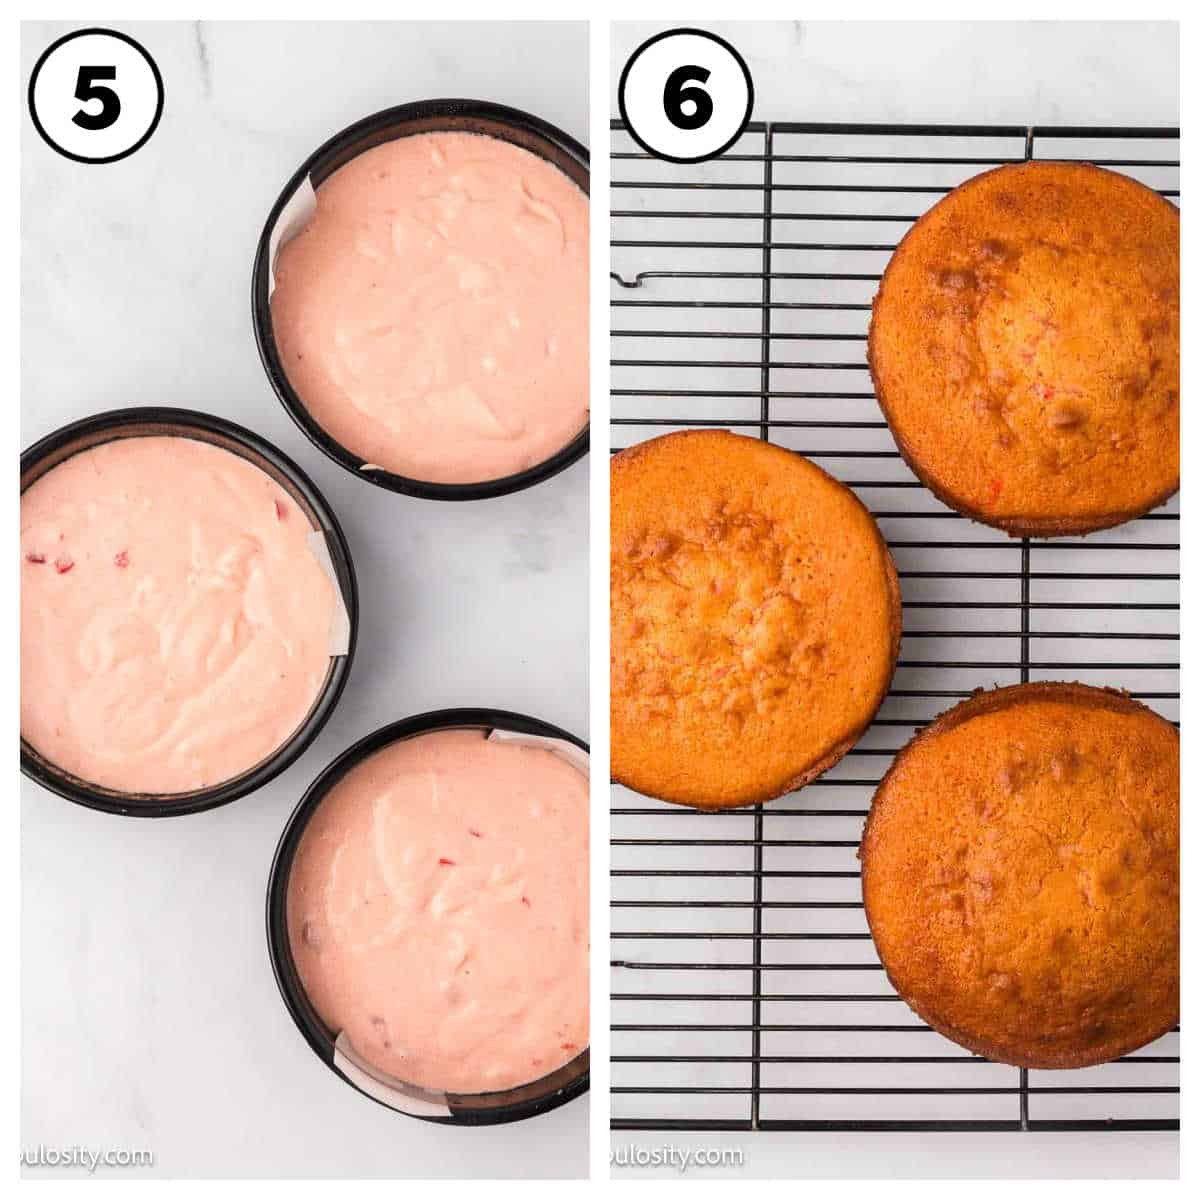 Cake batter in cake pans, and baked cake in cake pans.